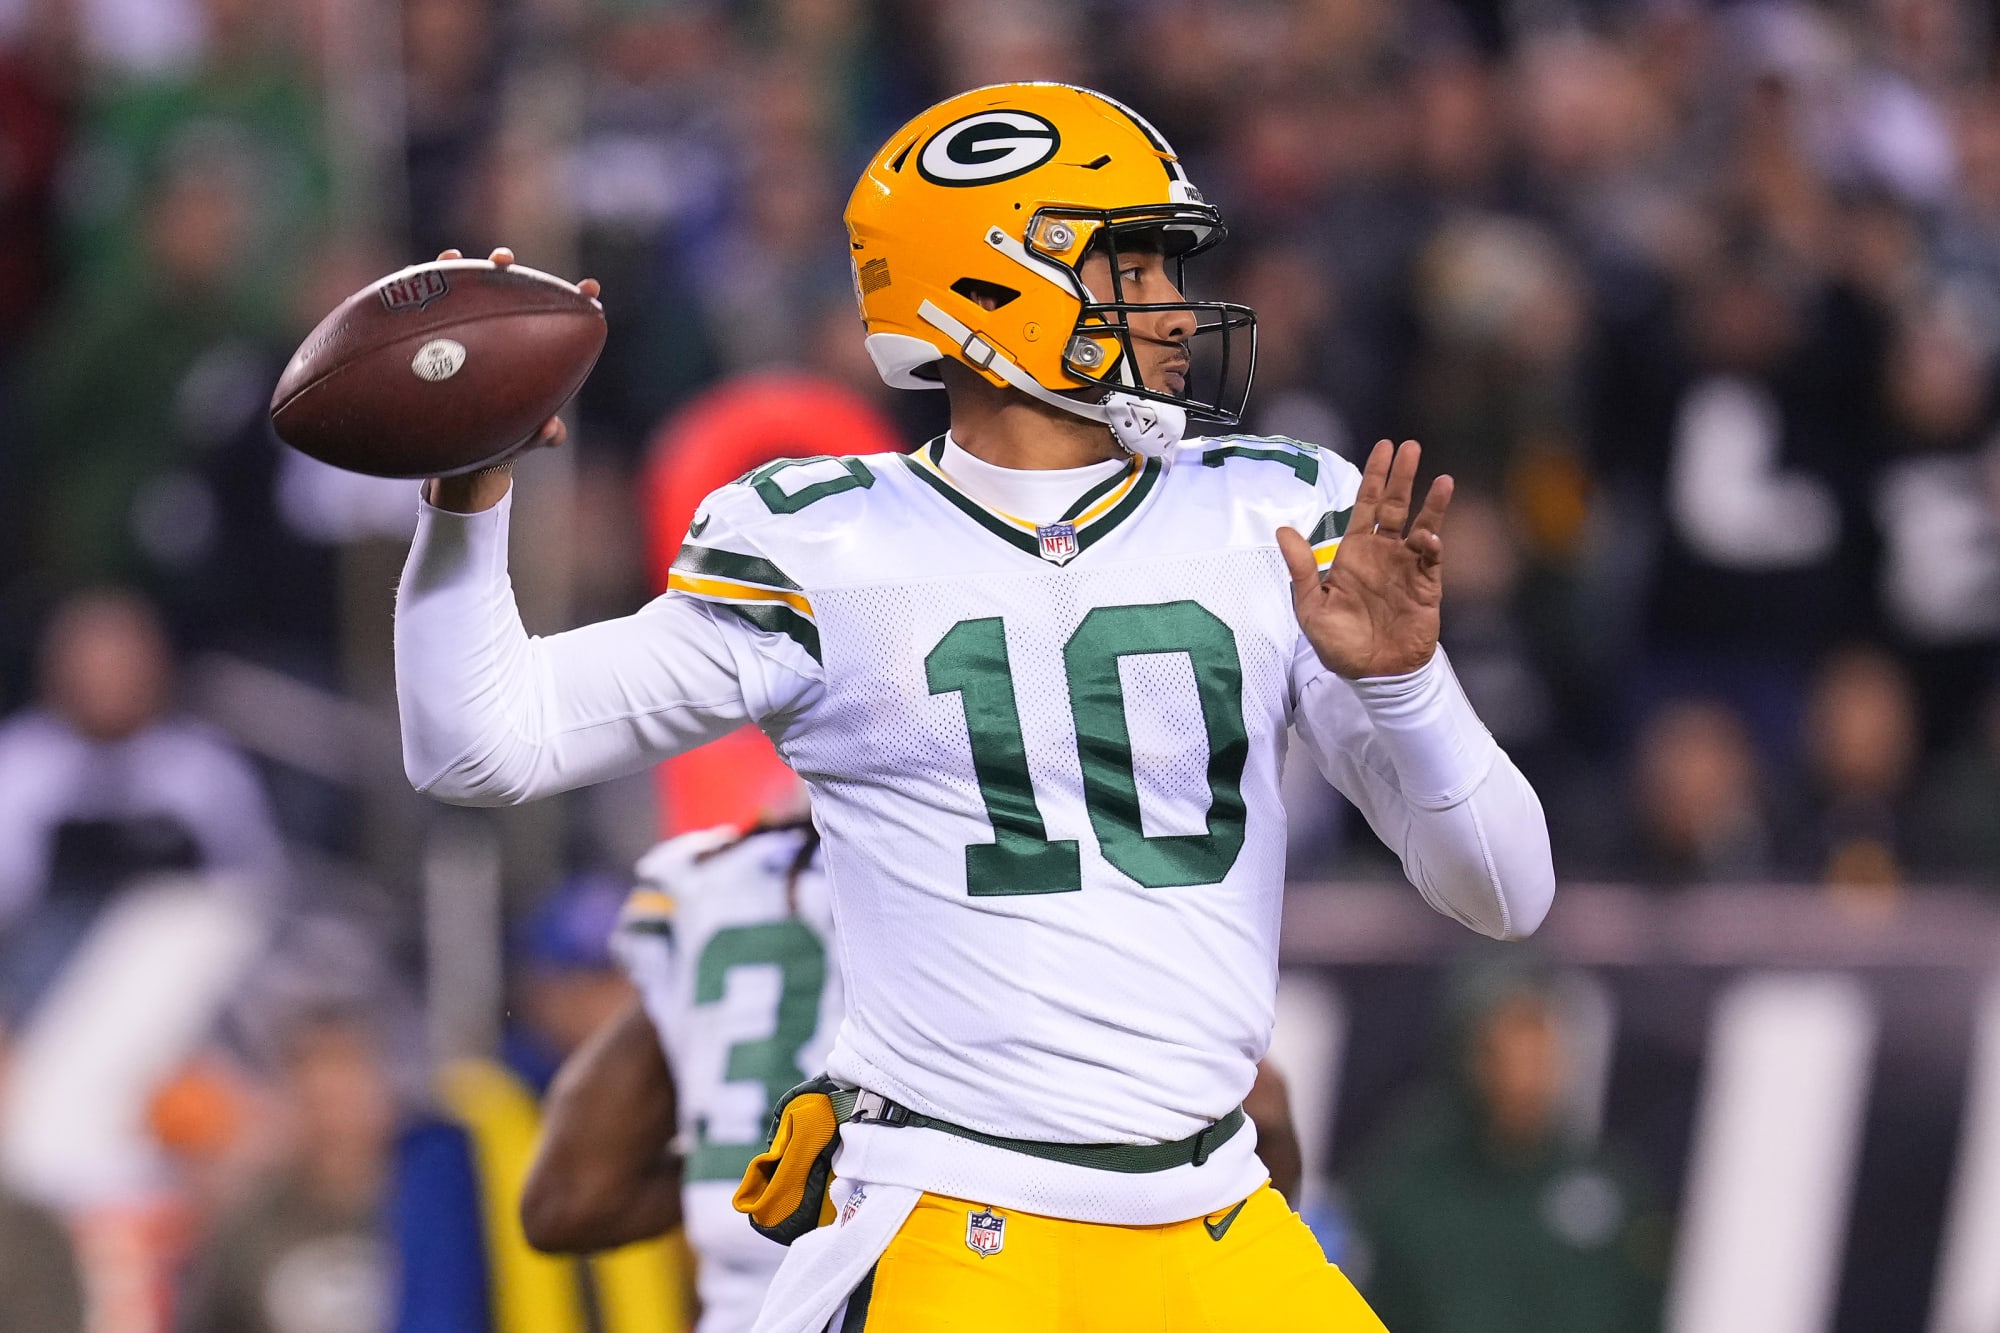 Packers Instant Takeaways: Jordan Love takes over for injured Aaron Rodgers - Dairyland Express